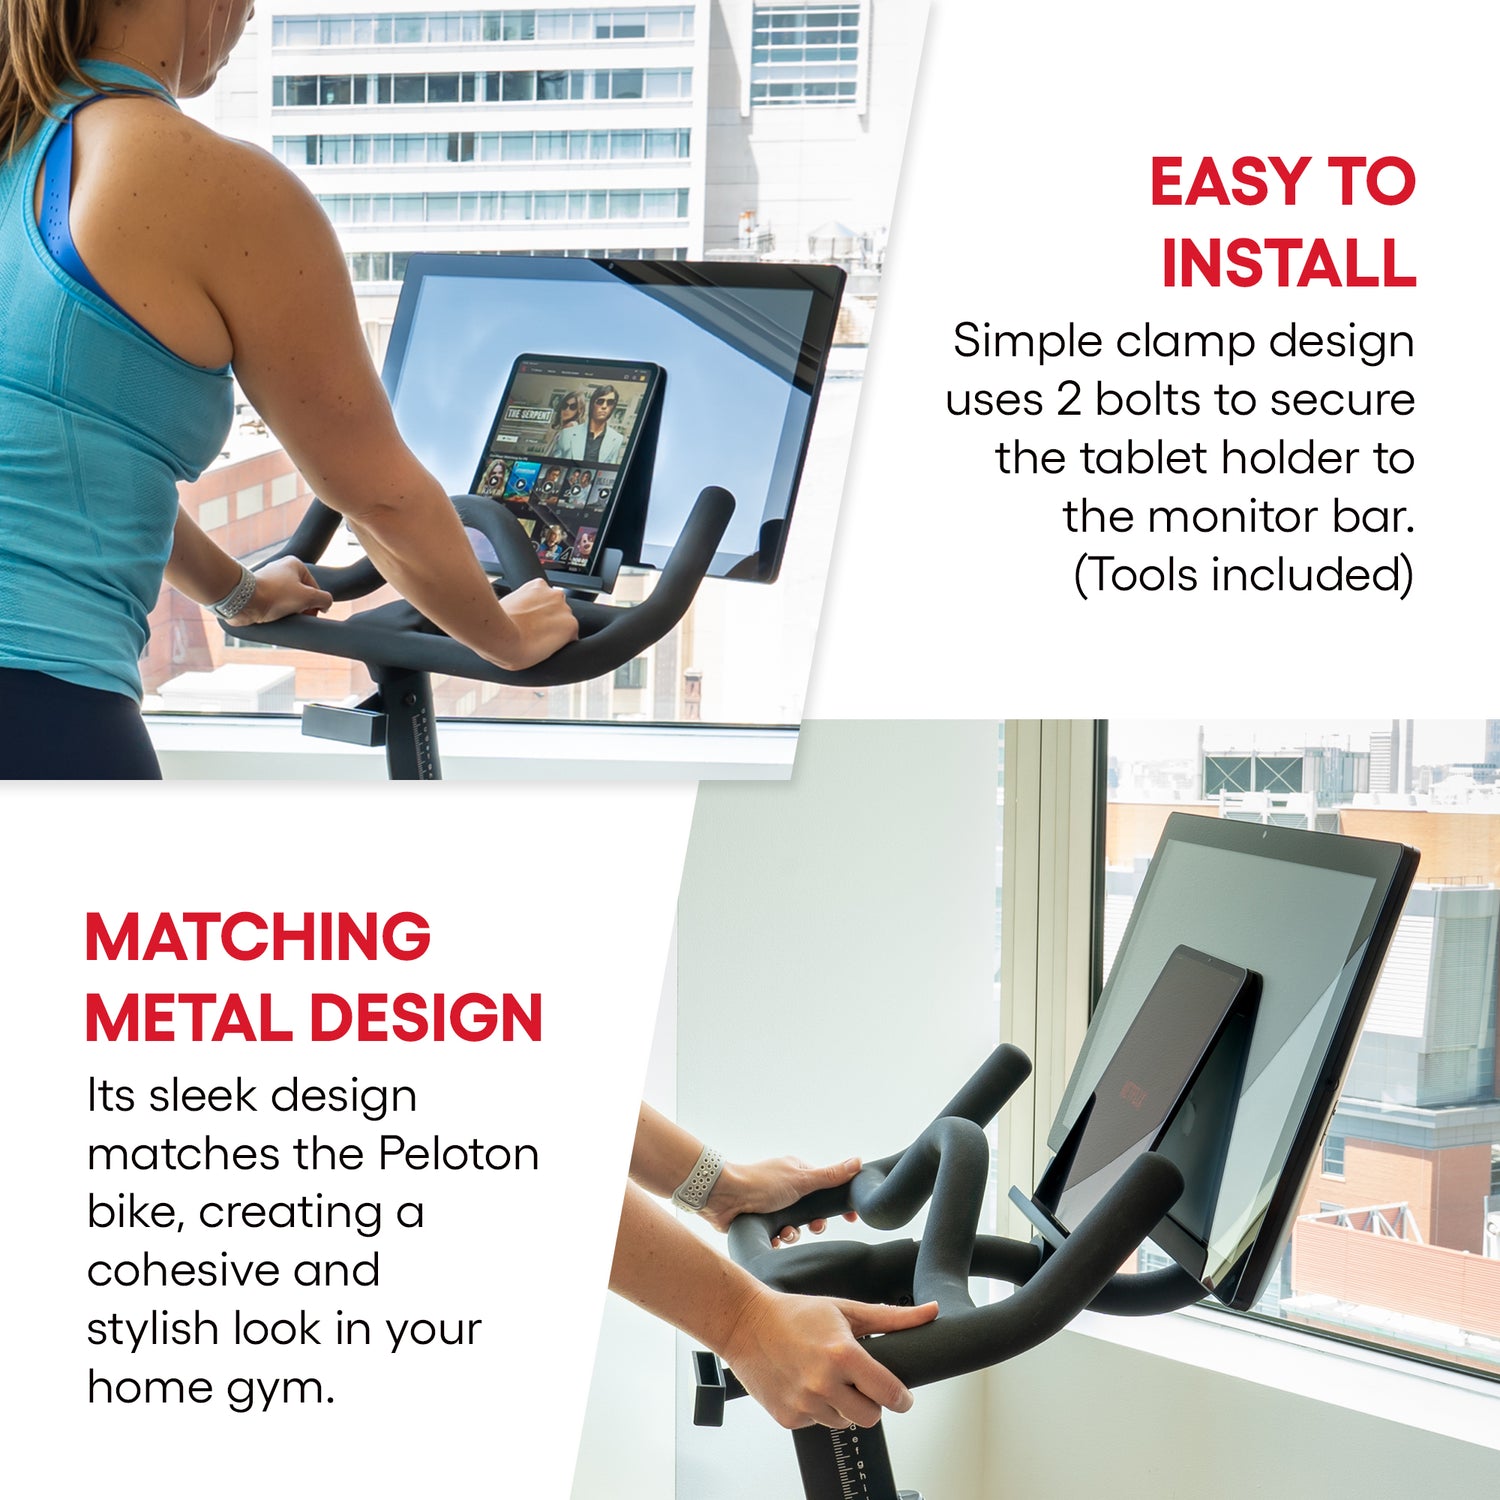 Peloton tablet holder - easy to install and matches the Peloton bike's metal design